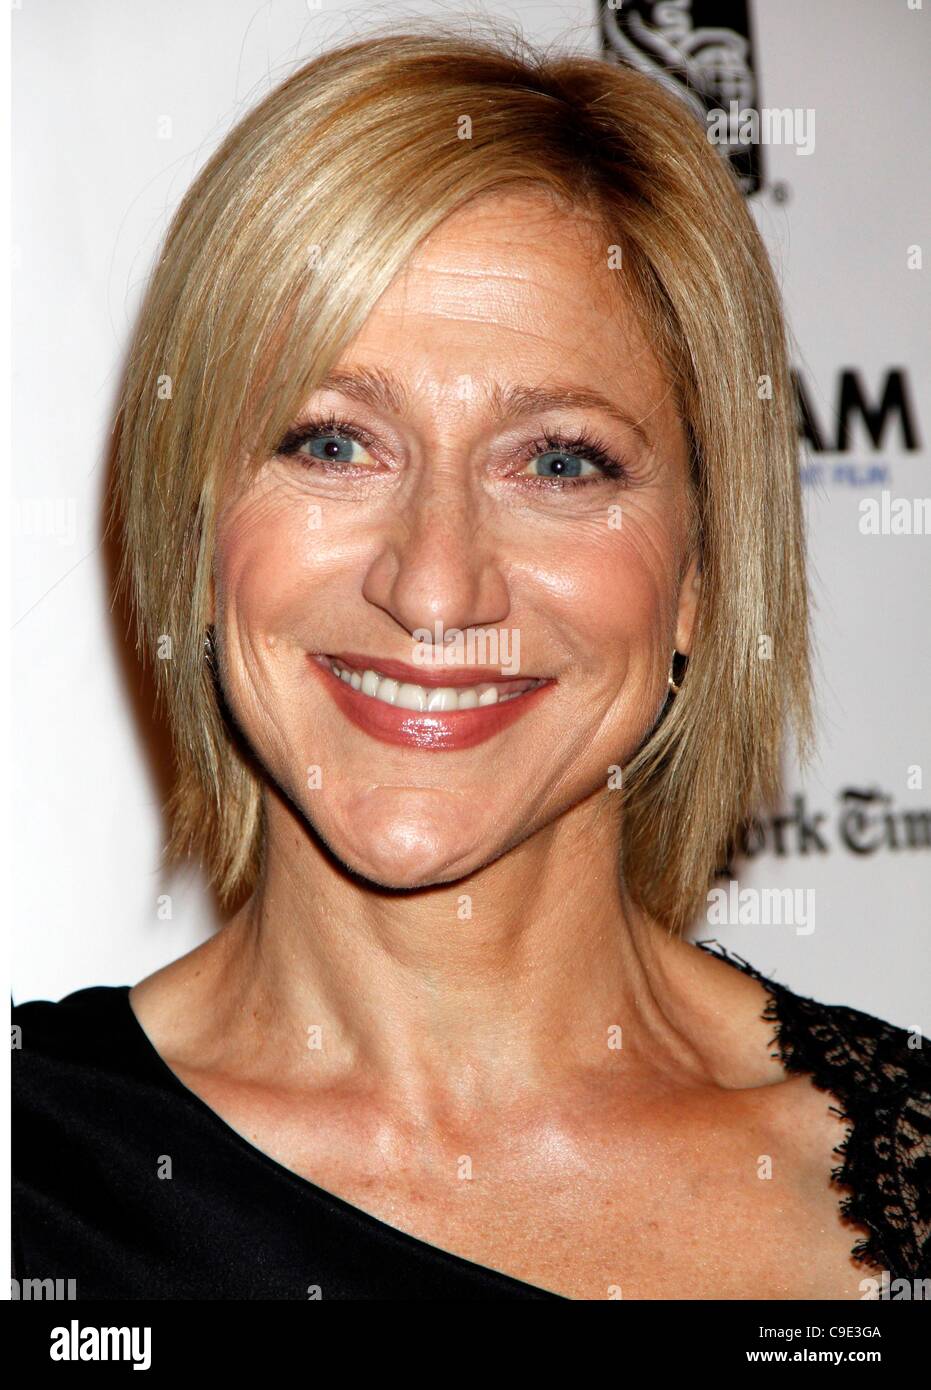 Edie Falco at arrivals for IFP'S 21st Annual Gotham Independent Film Awards, Cipriani Restaurant Wall Street, New York, NY November 28, 2011. Photo By: F. Burton Patrick/Everett Collection Stock Photo